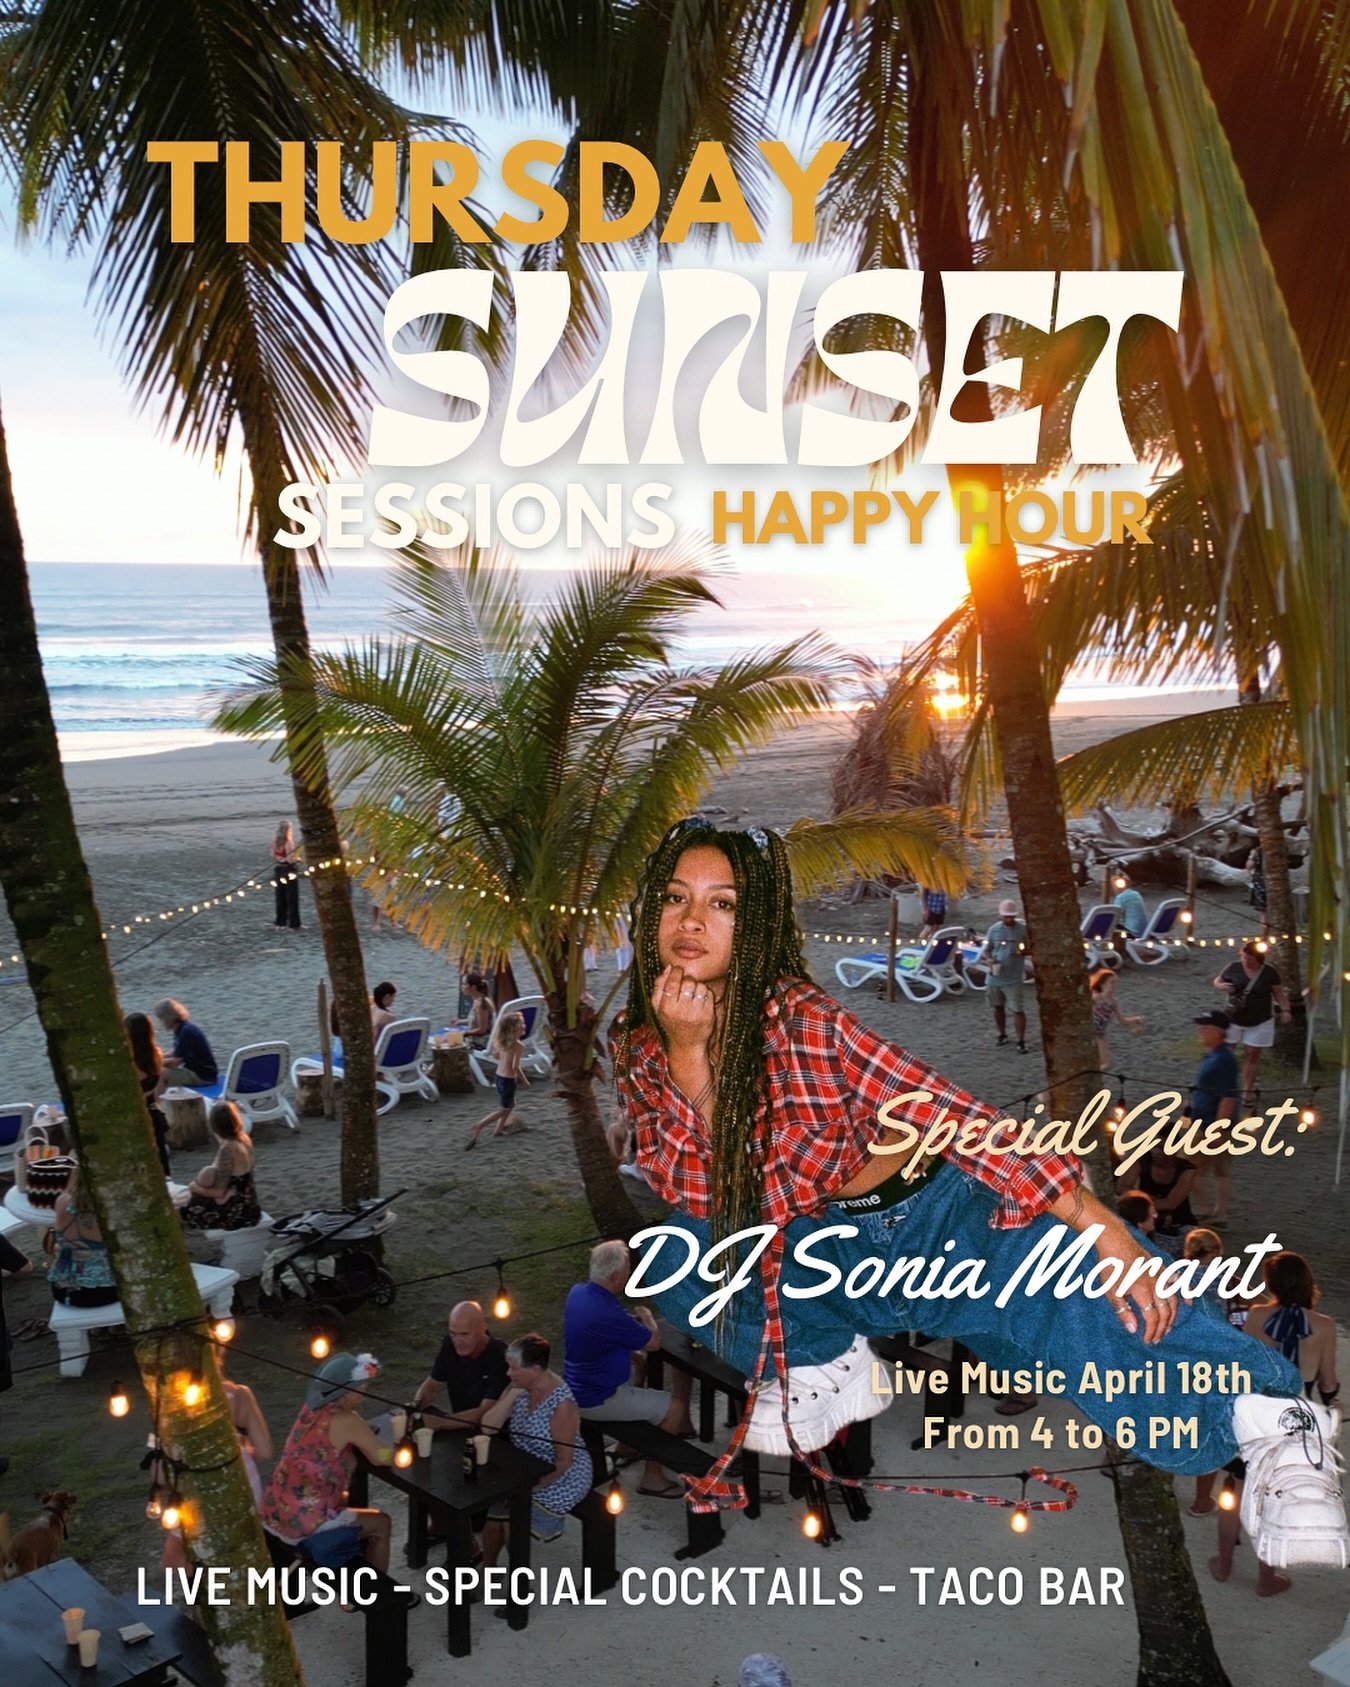 This Thursday join our Sunset Sessions Happy Hour and discover the music of DJ @soniasolll 

Join us for an afternoon of special cocktails
🎶🎧 Live music, taco bar, and the best sunset in Esterillos!
👉 Thursday April 18th from 4 to 6pm
📍Encantada 